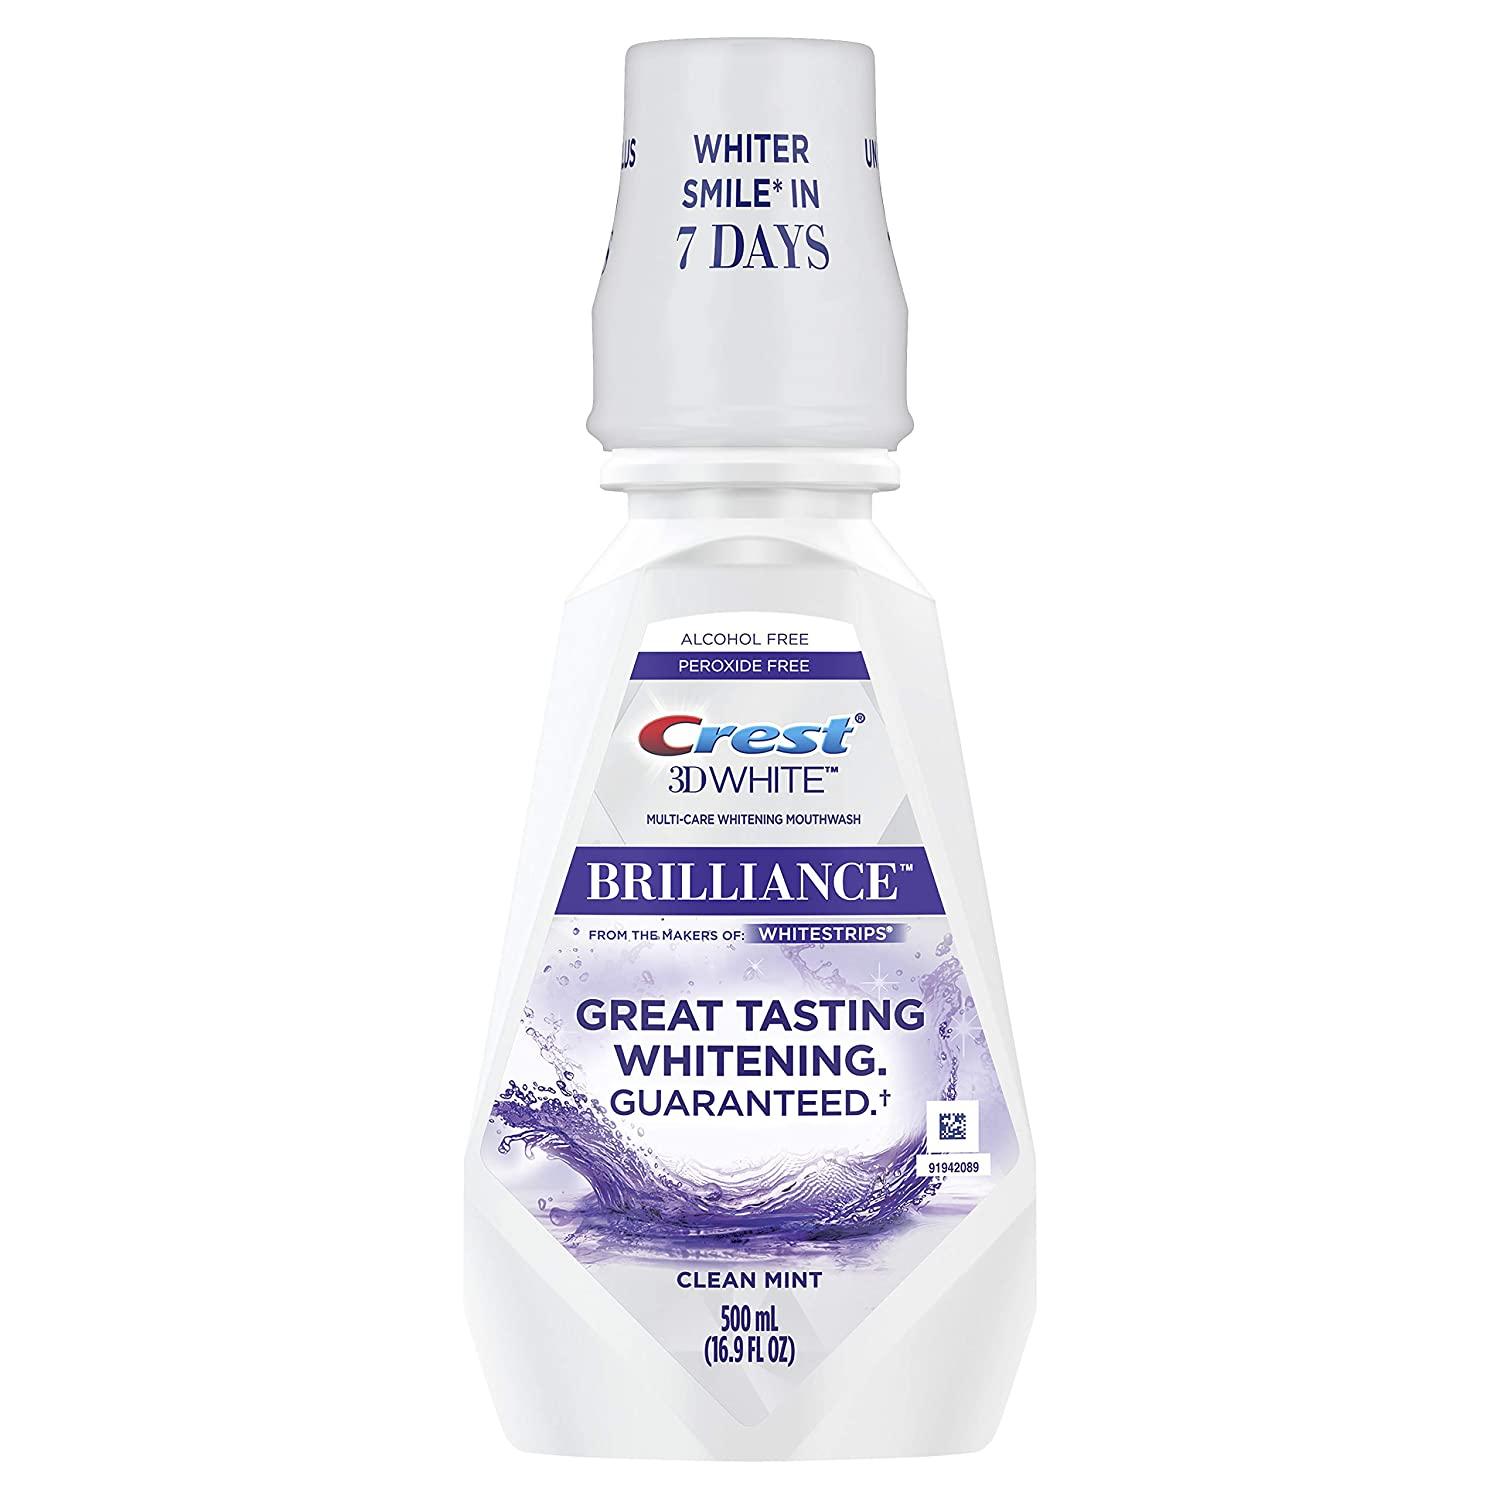 Crest 3D White Brilliance Whitening Mouthwash for $4.74 Shipped